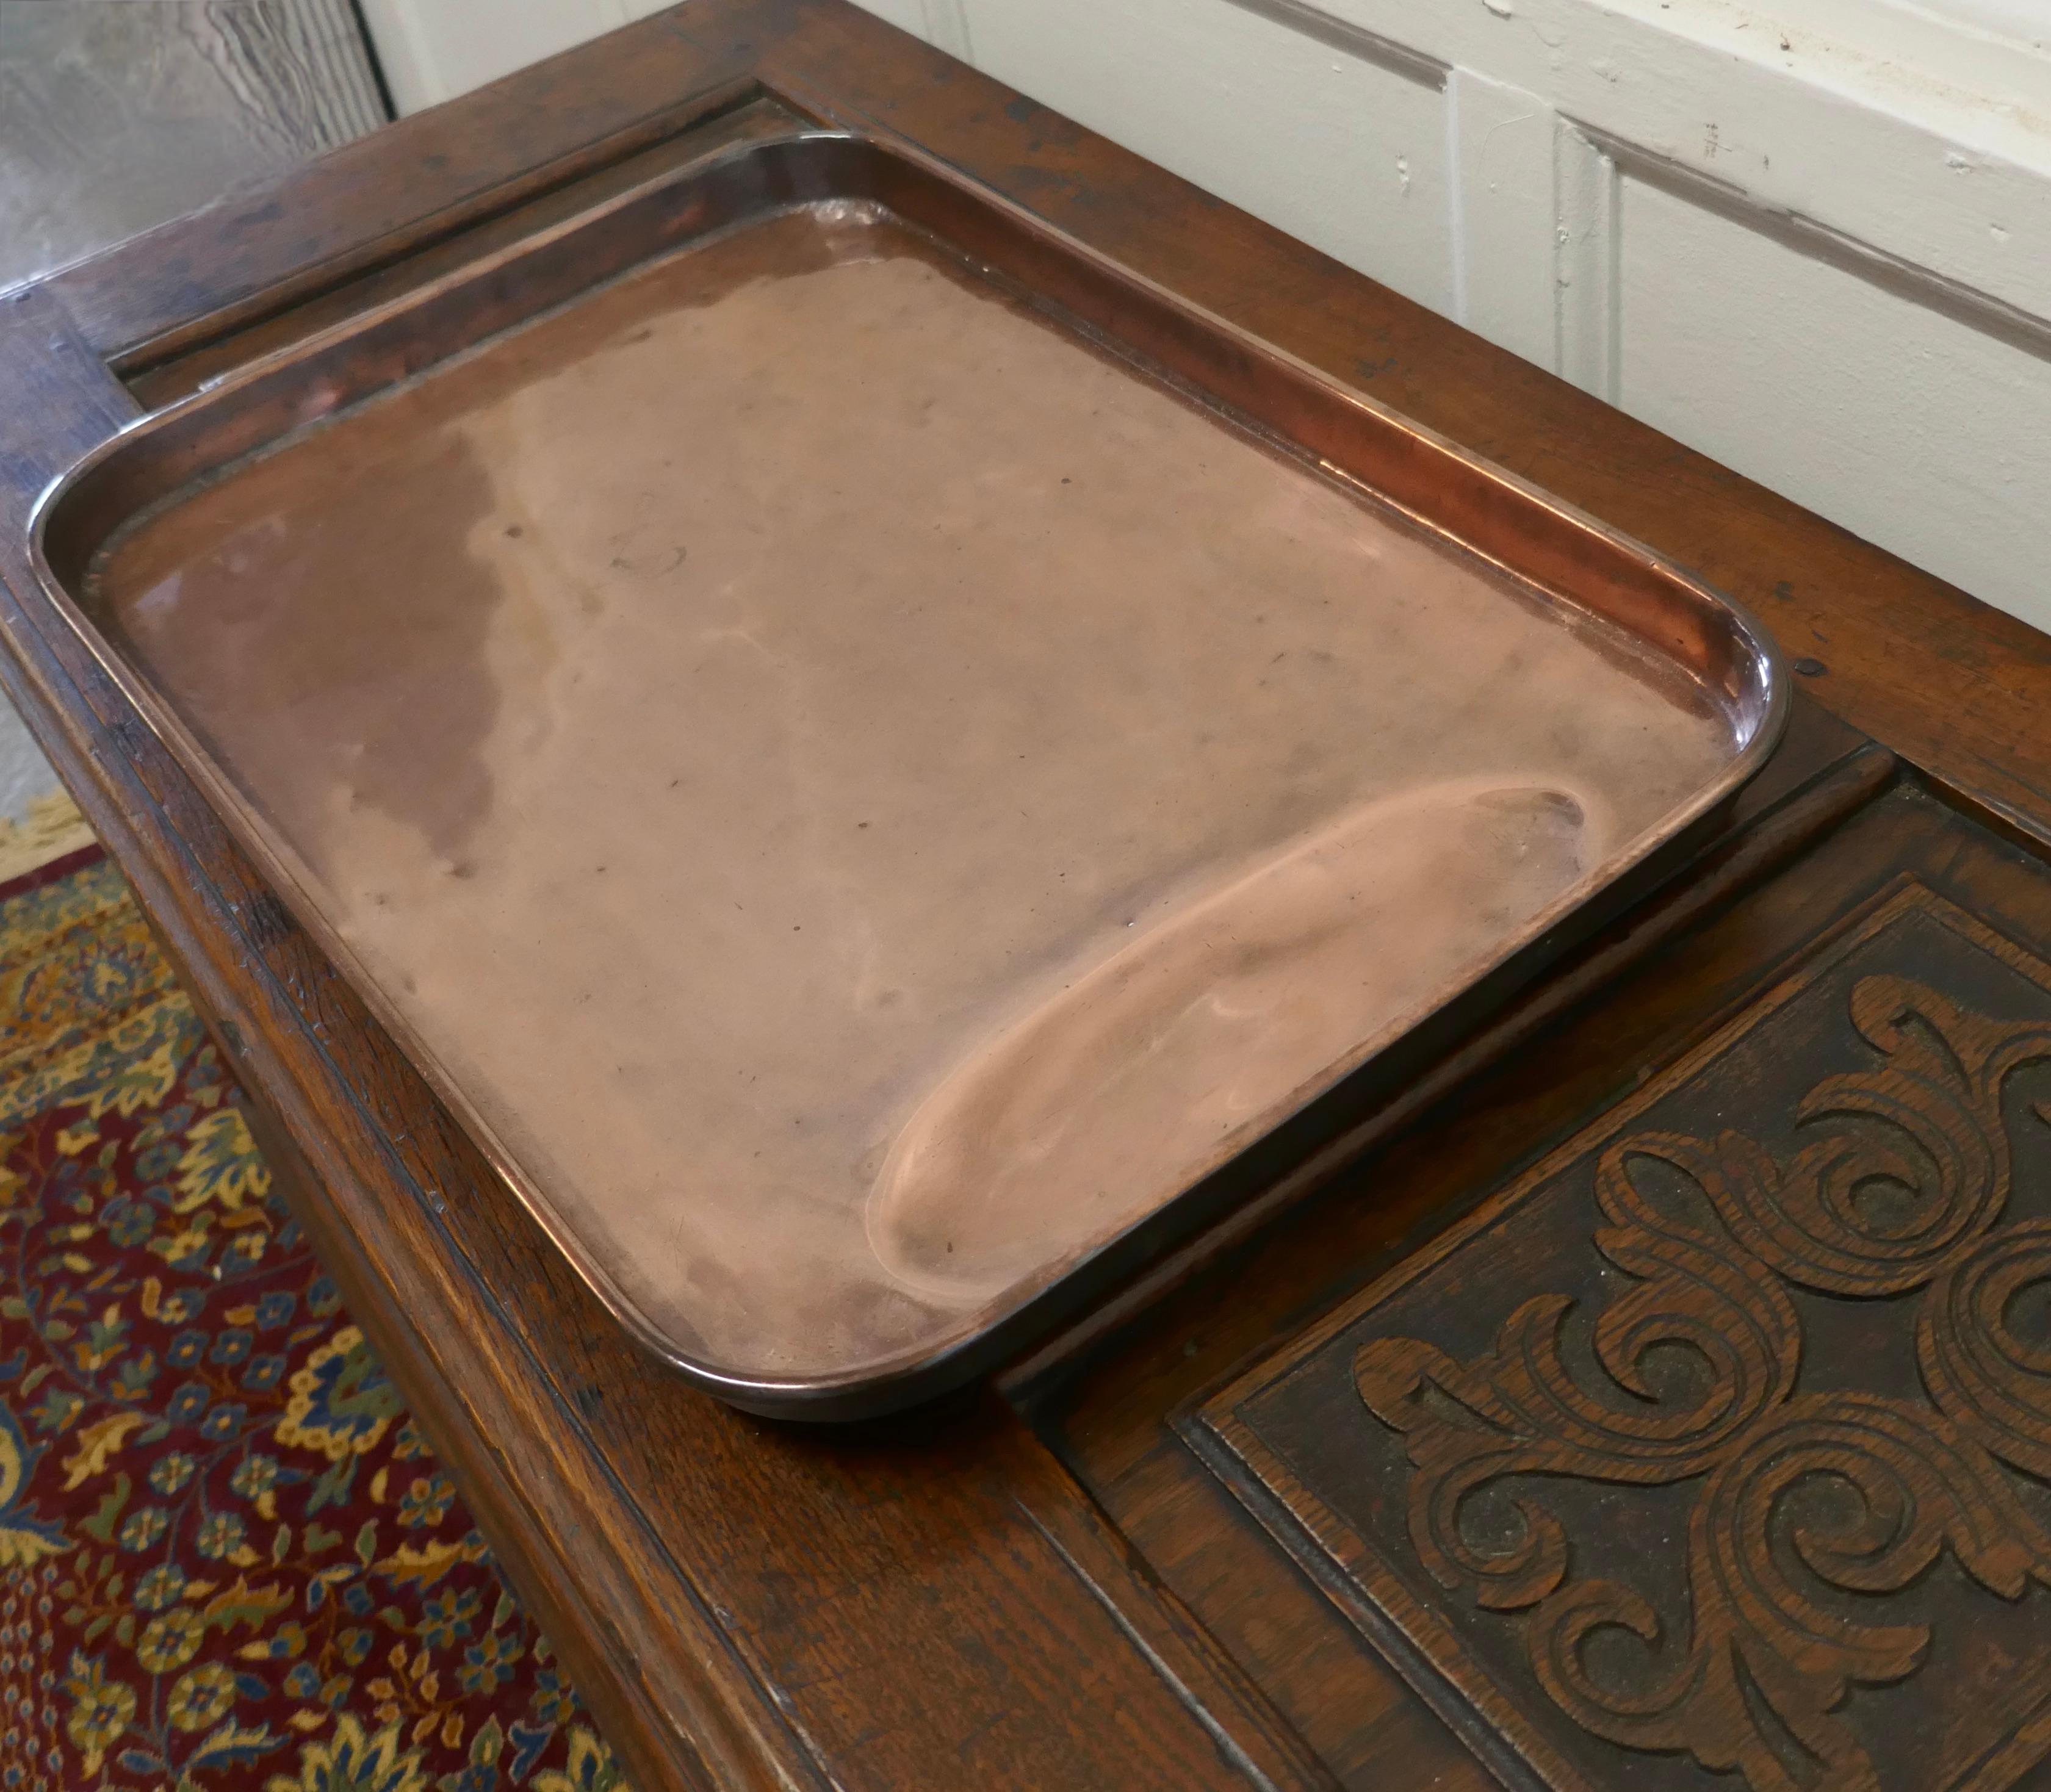 Early Victorian Large 19th Century Copper Roasting Tray with Gravy Well